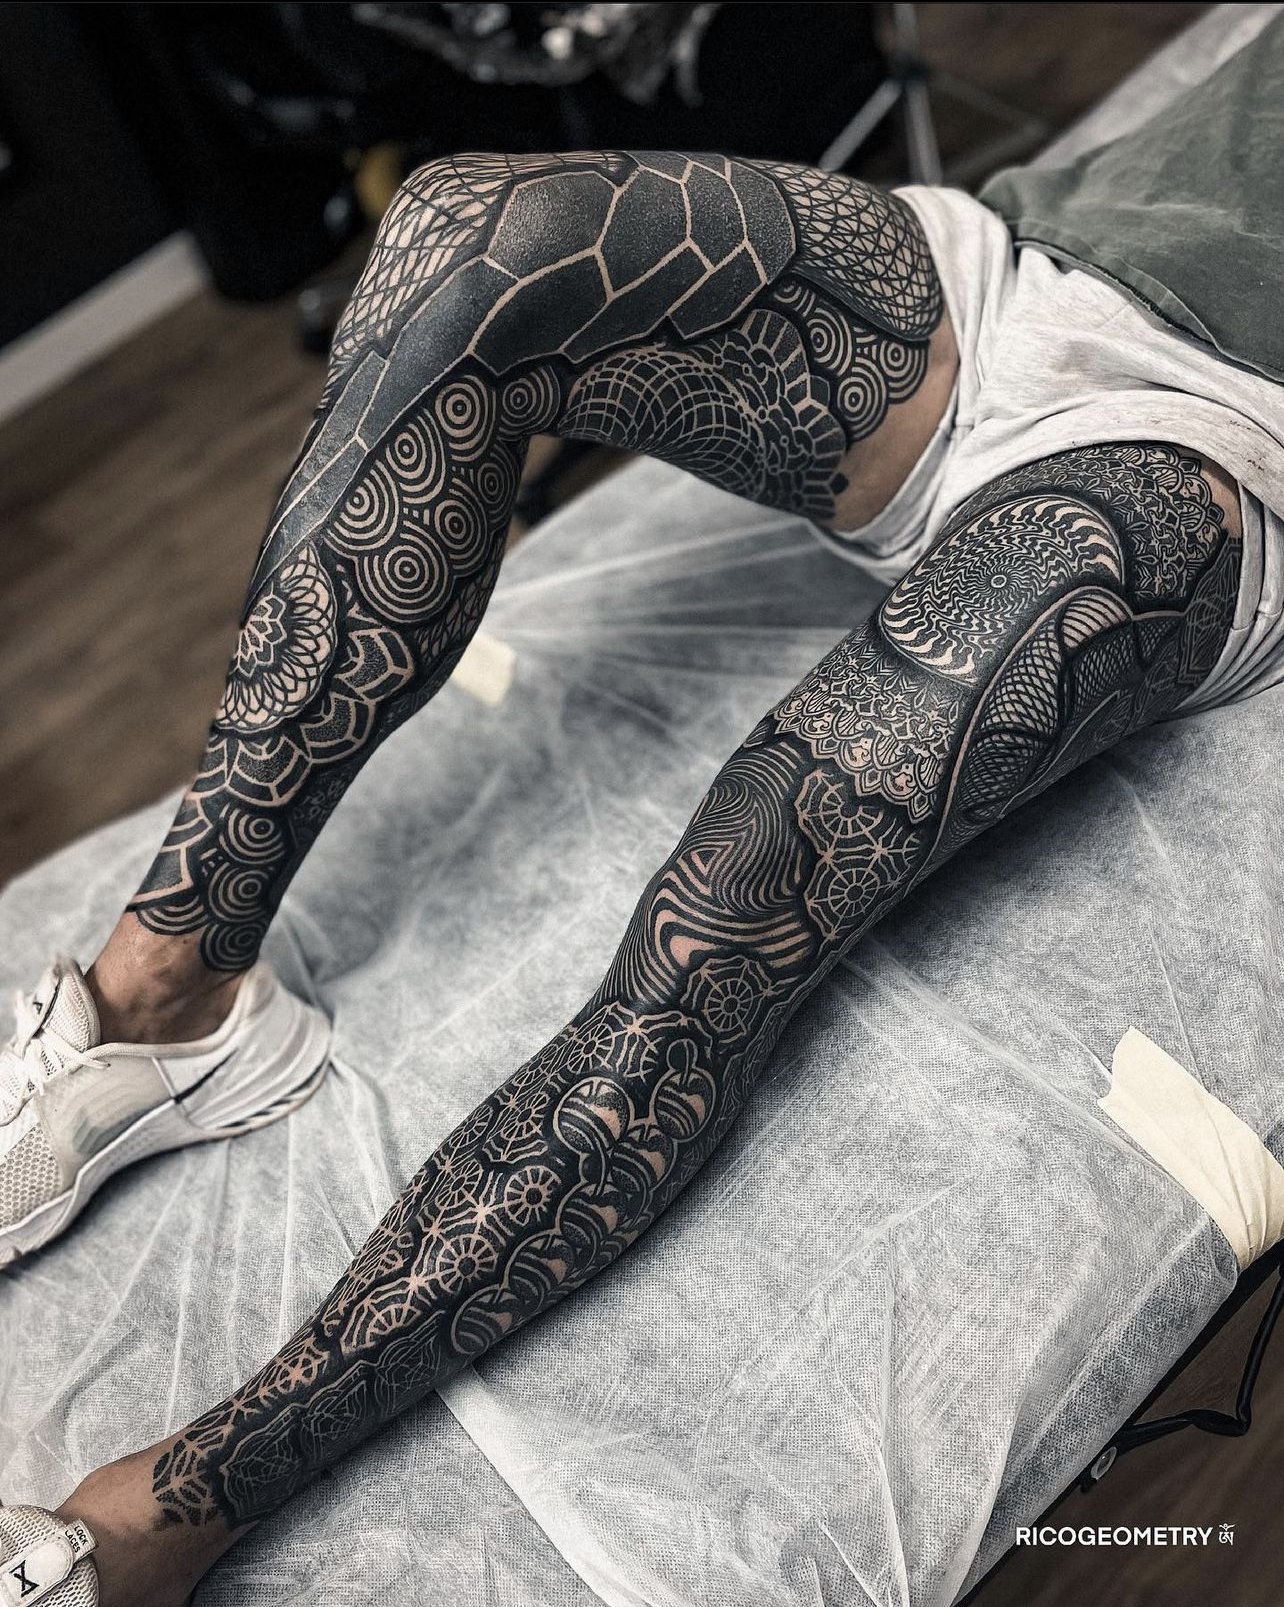 95 TopGrade Butterfly Thigh Tattoos For Women